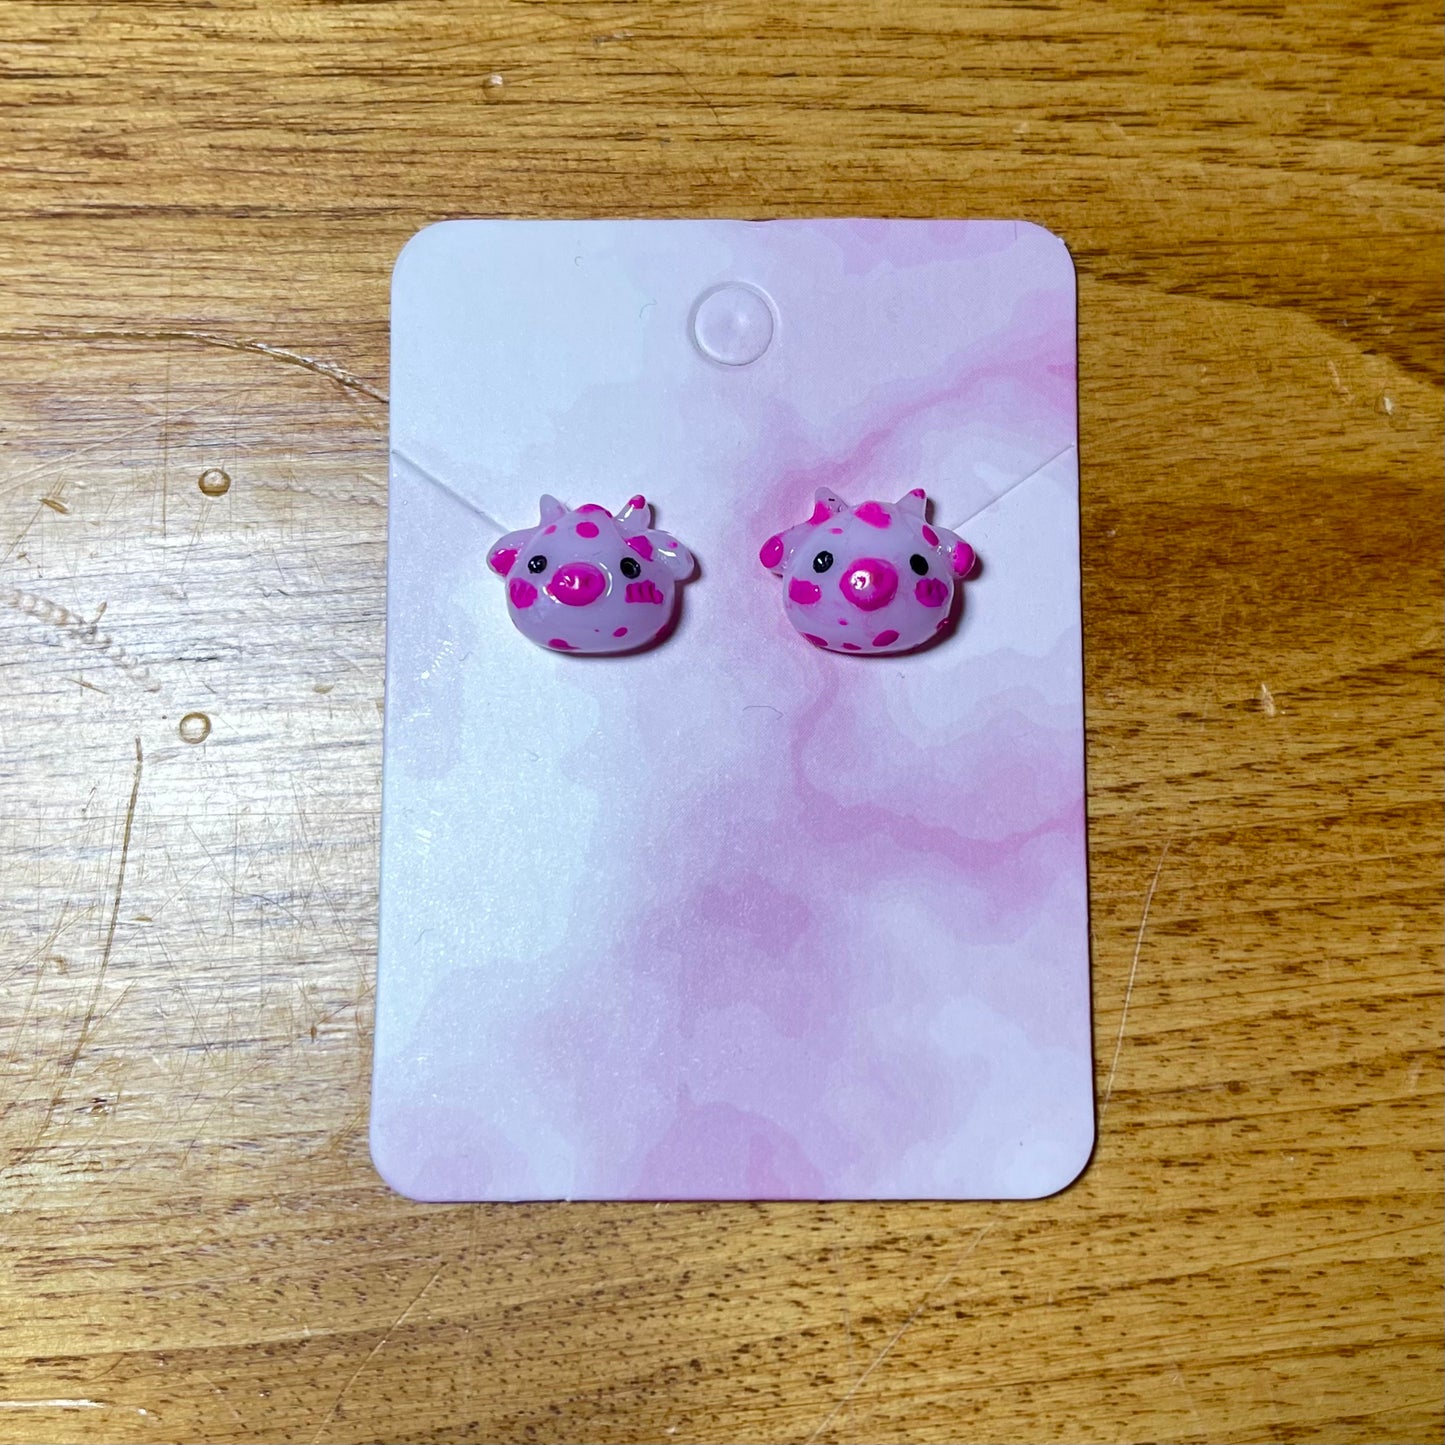 Strawberry and White Milk Cow Stud Earrings 2-Pack